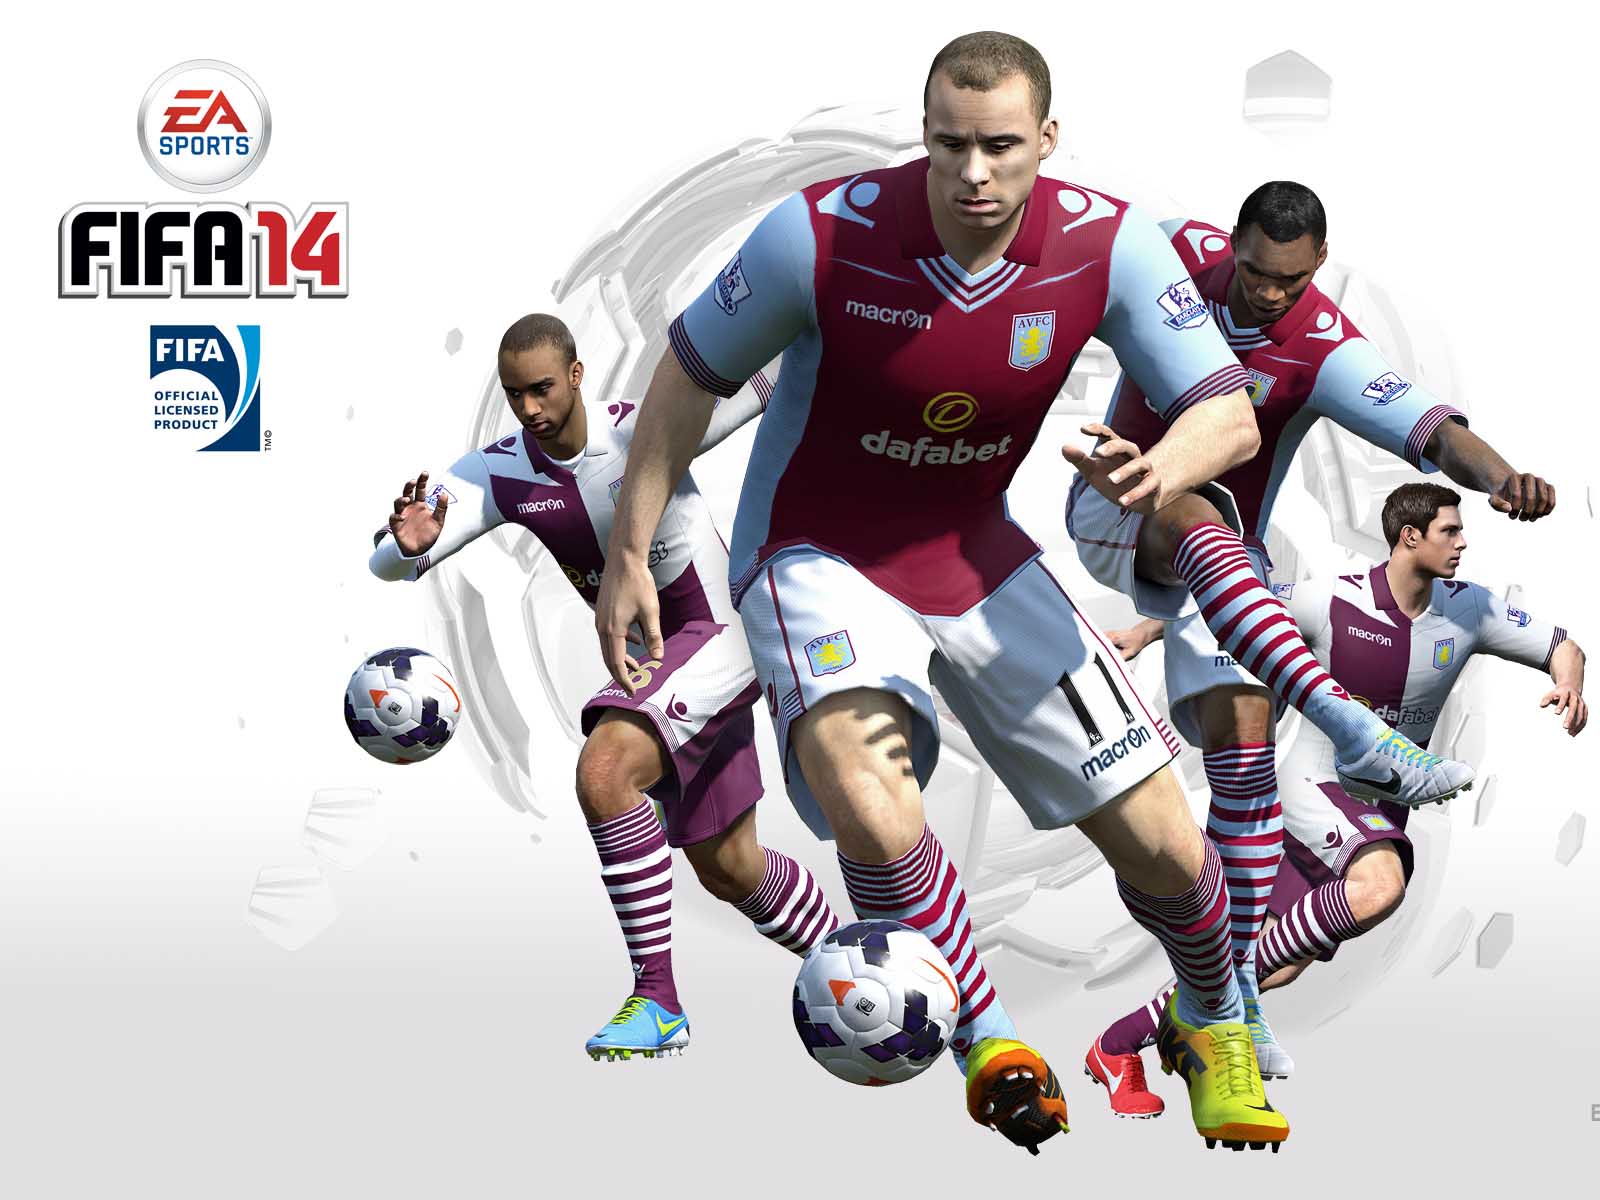 FIFA 14 Wallpapers - All Official FIFA 14 Wallpapers in a Single Place